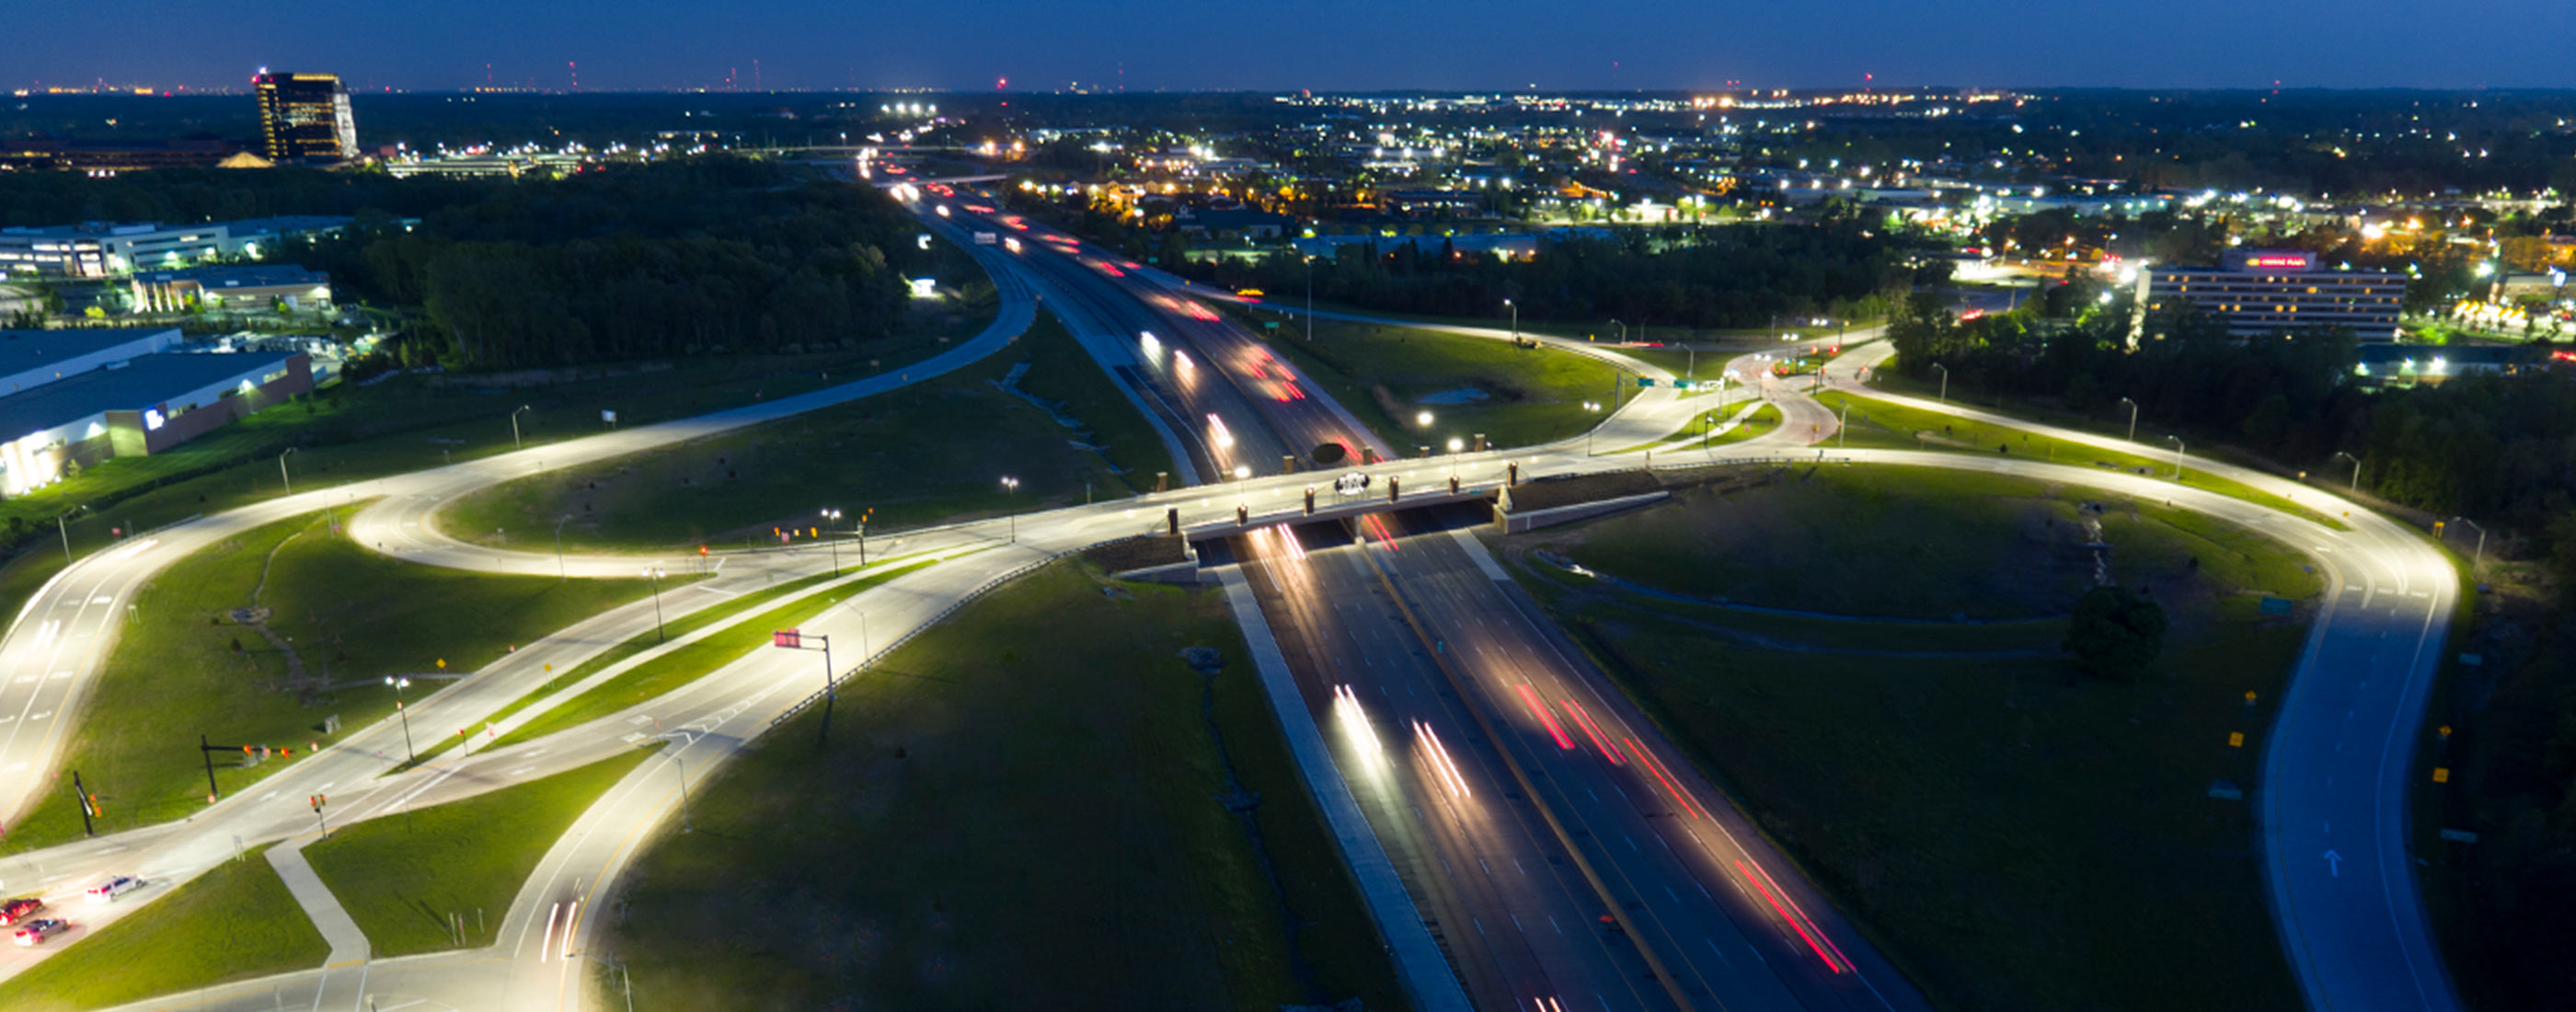 A nighttime view of the Diverging Diamond Interchange located at Auburn Hills, MI’s I-75 and University Drive.